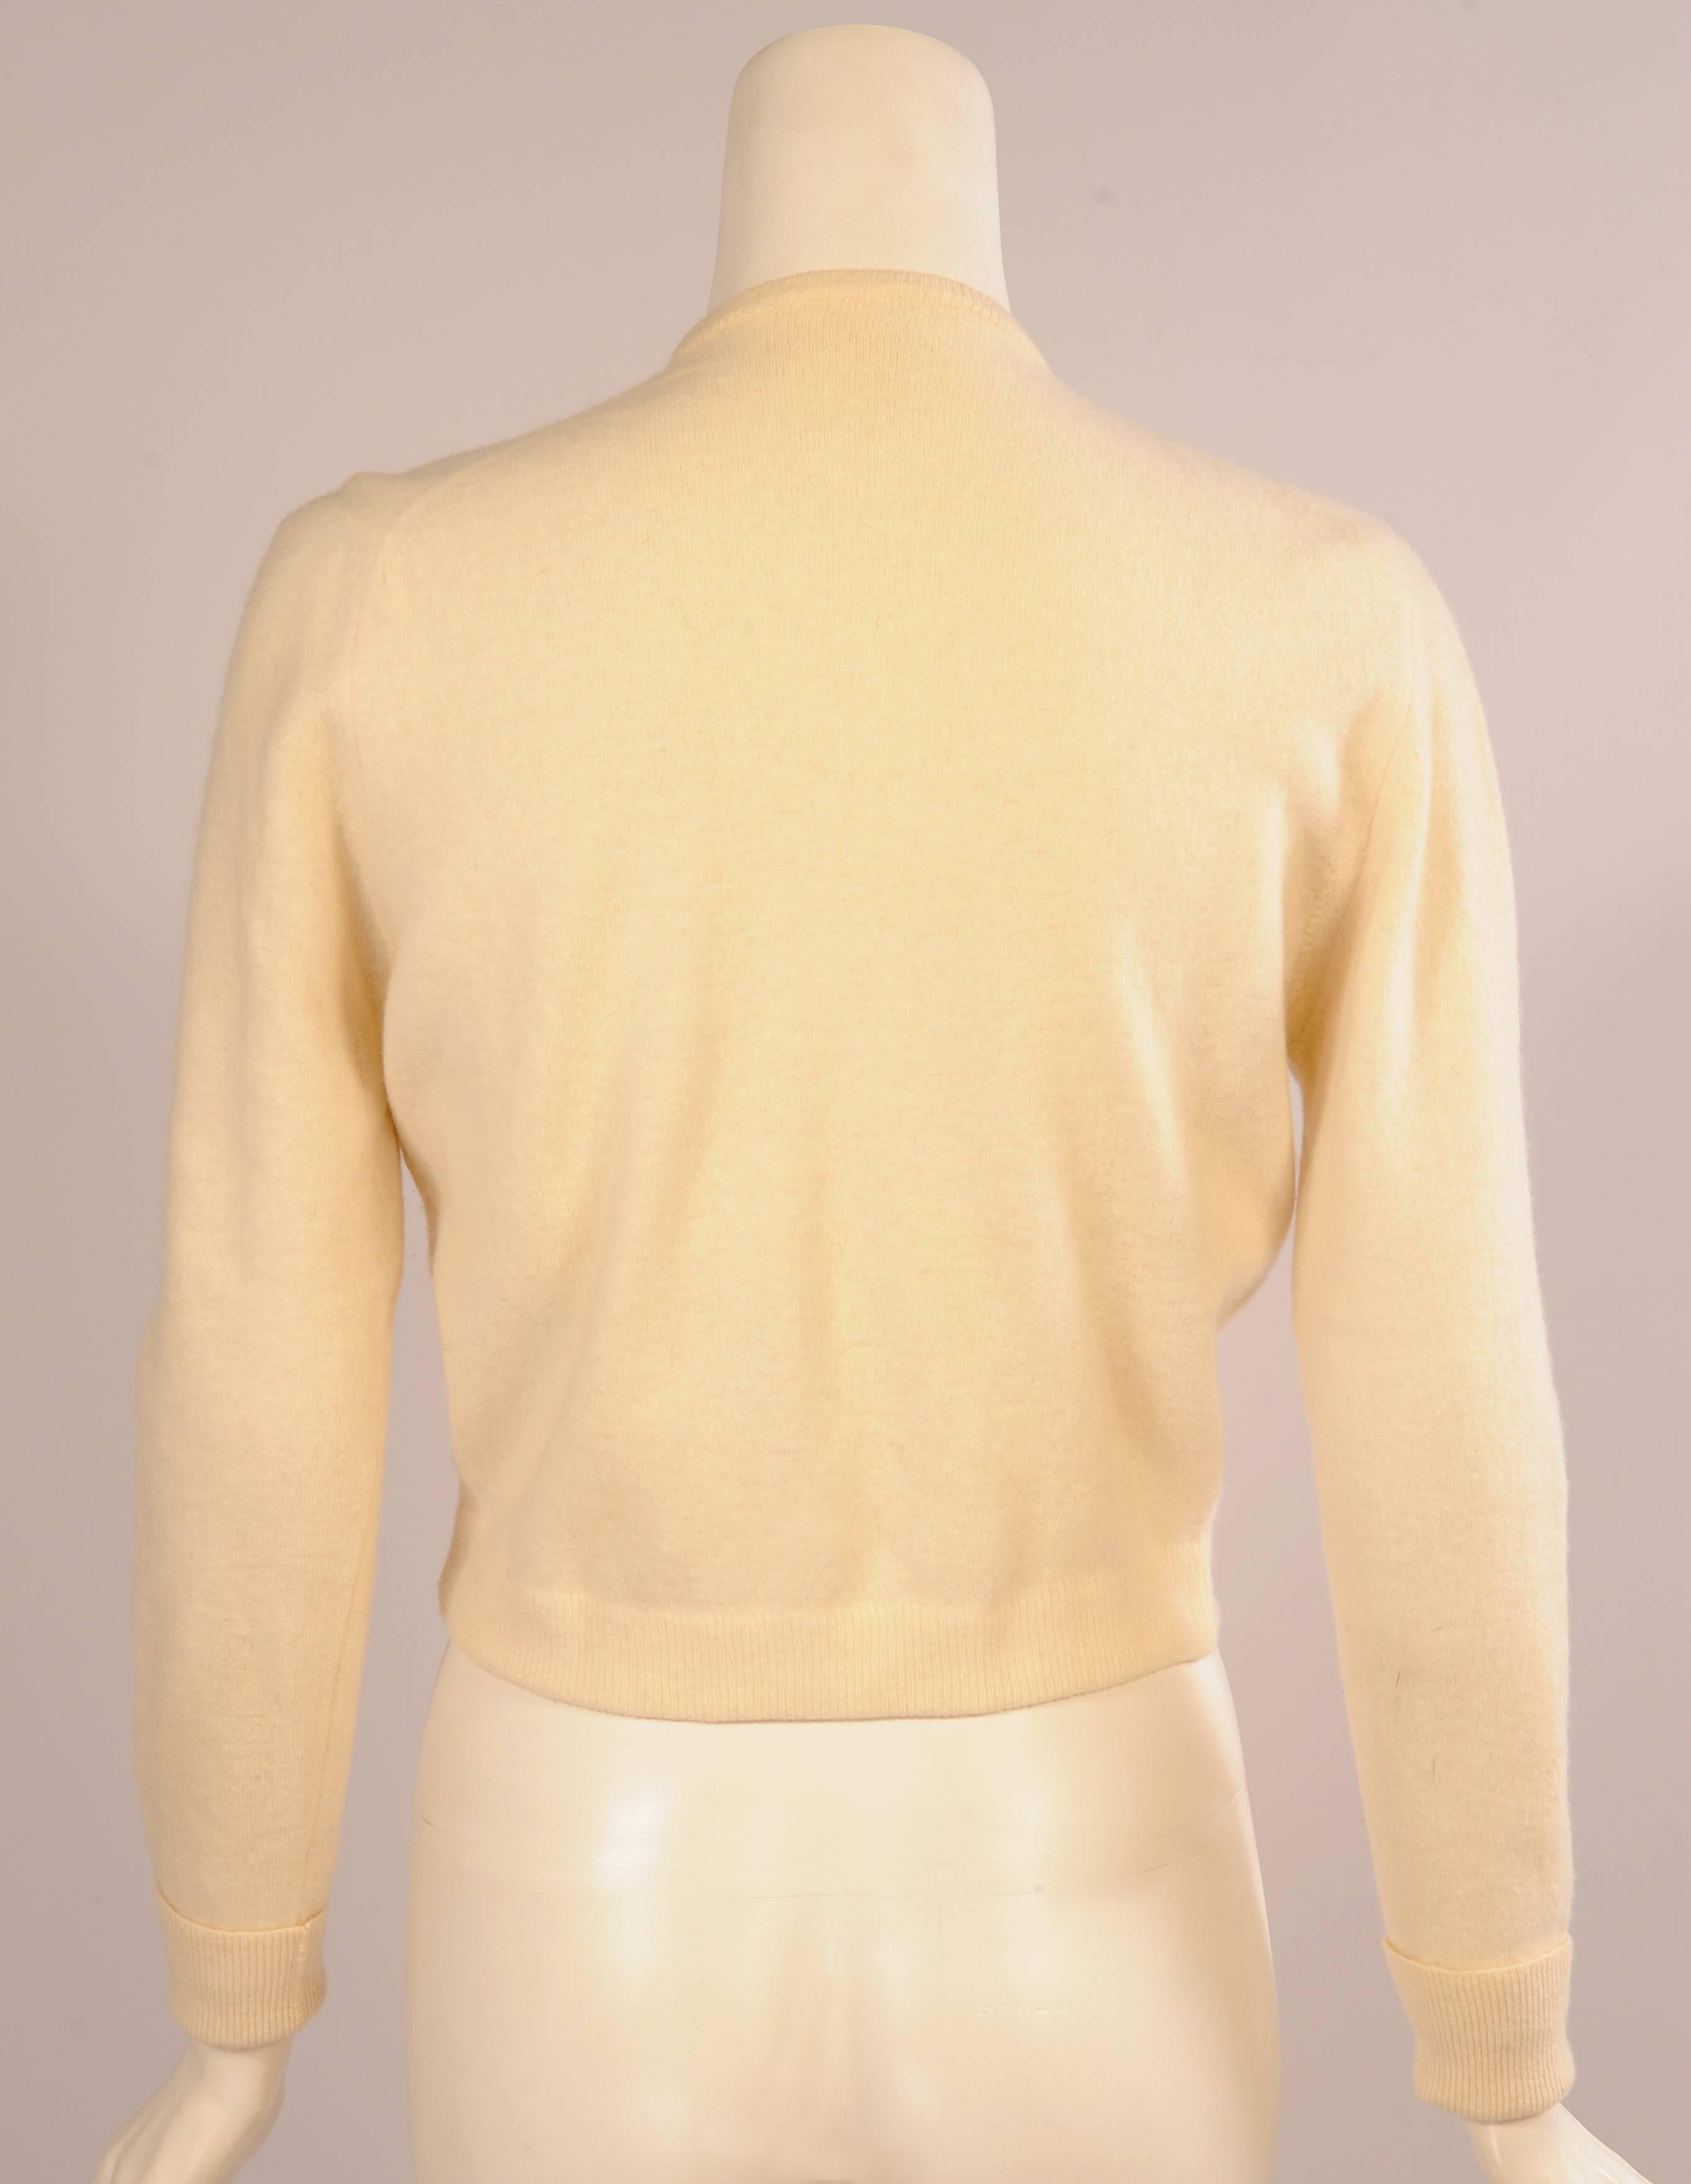 Embroidered and Ribbon Trimmed Ivory Sweater, 1950s  In Excellent Condition For Sale In New Hope, PA